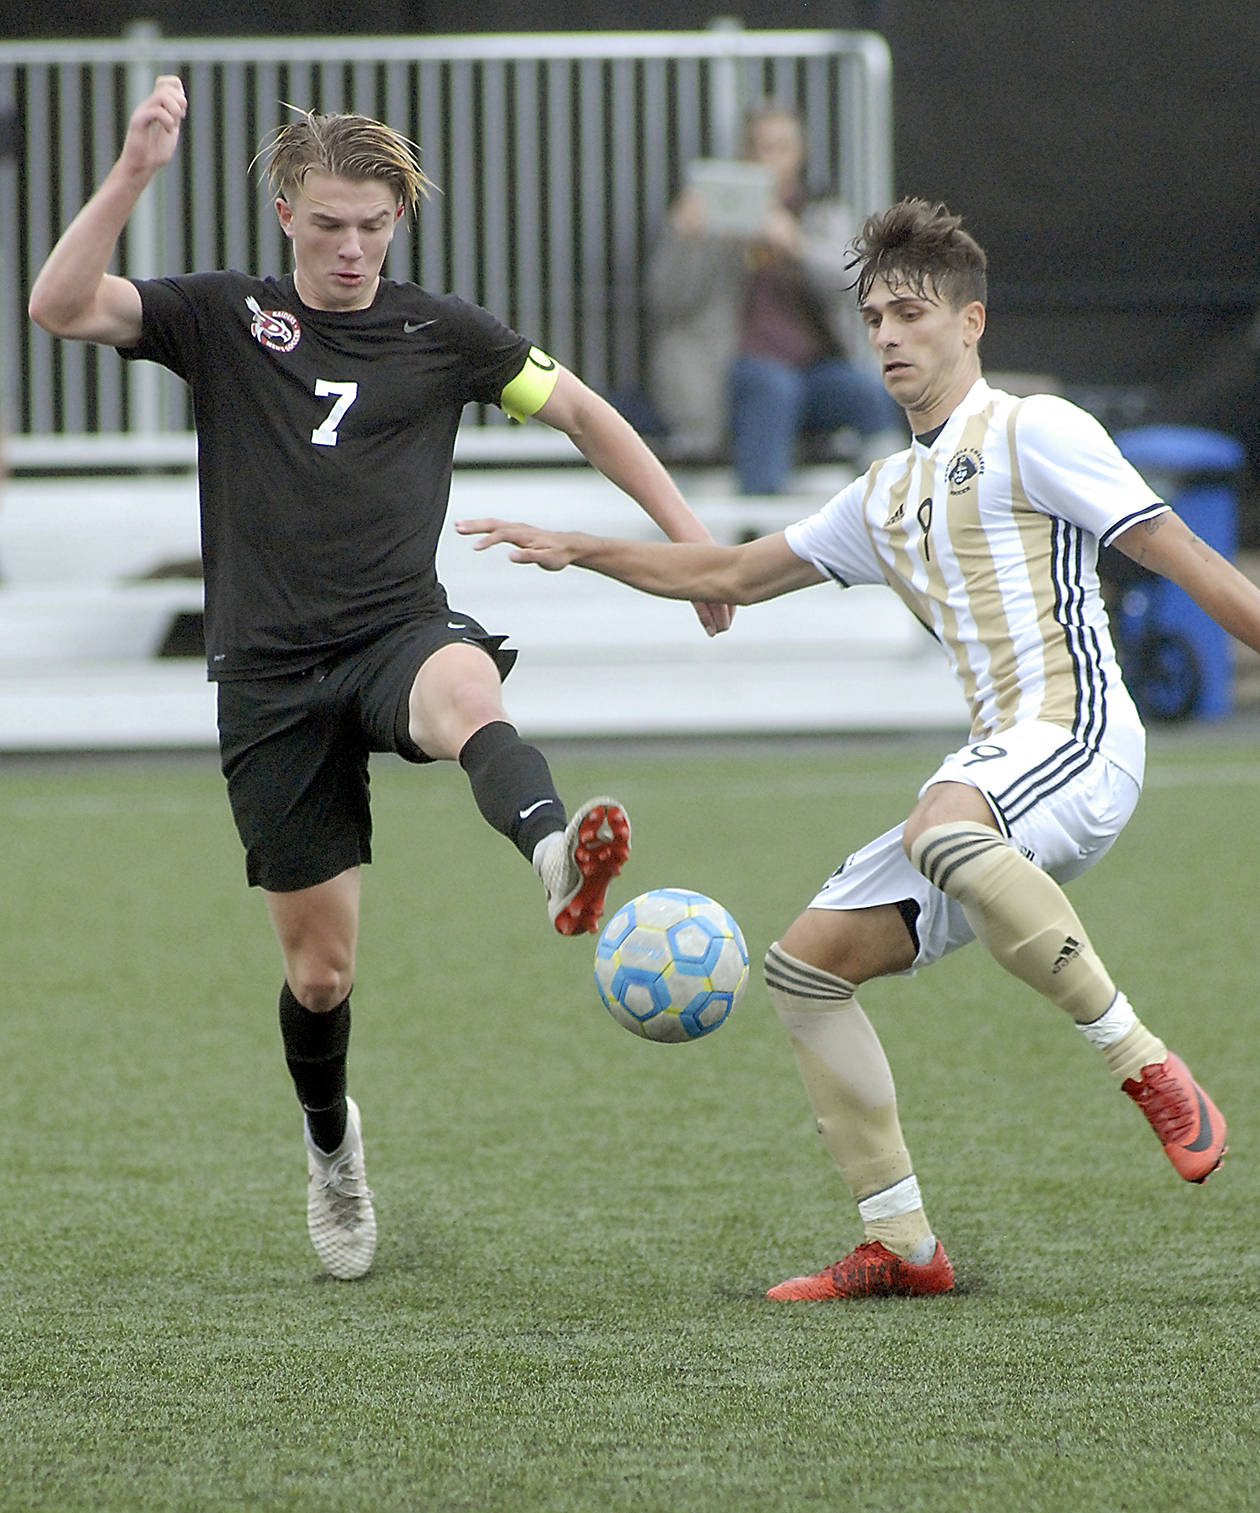 &lt;strong&gt;Keith Thorpe&lt;/strong&gt;/Peninsula Daily News                                Pierce’s Austin Stafford, left, and Peninsula’s Manuyel Galiano dance around a loose ball during Wednesday’s NWAC first-round playoff game at Wally Sigmar Field in Port Angeles.